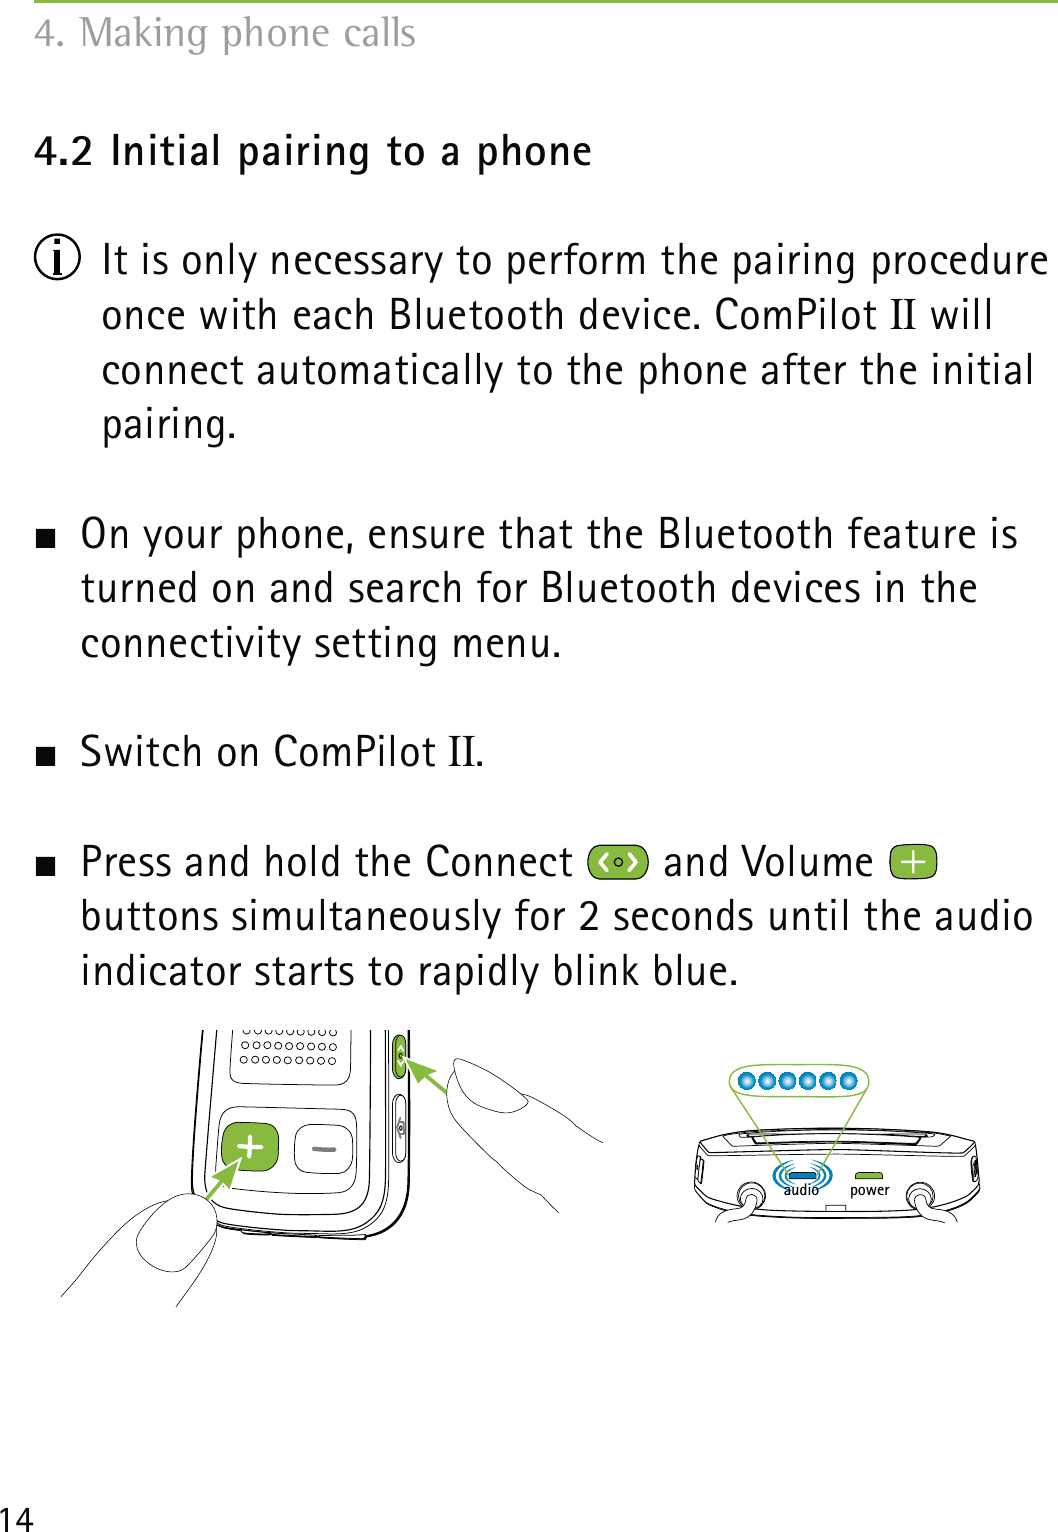 144.2 Initial pairing to a phone  It is only necessary to perform the pairing procedure once with each Bluetooth device. ComPilot II will connect automatically to the phone after the initial pairing.  On your phone, ensure that the Bluetooth feature is turned on and search for Bluetooth devices in the connectivity setting menu.  Switch on ComPilot II.  Press and hold the Connect   and Volume    buttons simultaneously for 2 seconds until the audio indicator starts to rapidly blink blue. 4. Making phone callspoweraudio